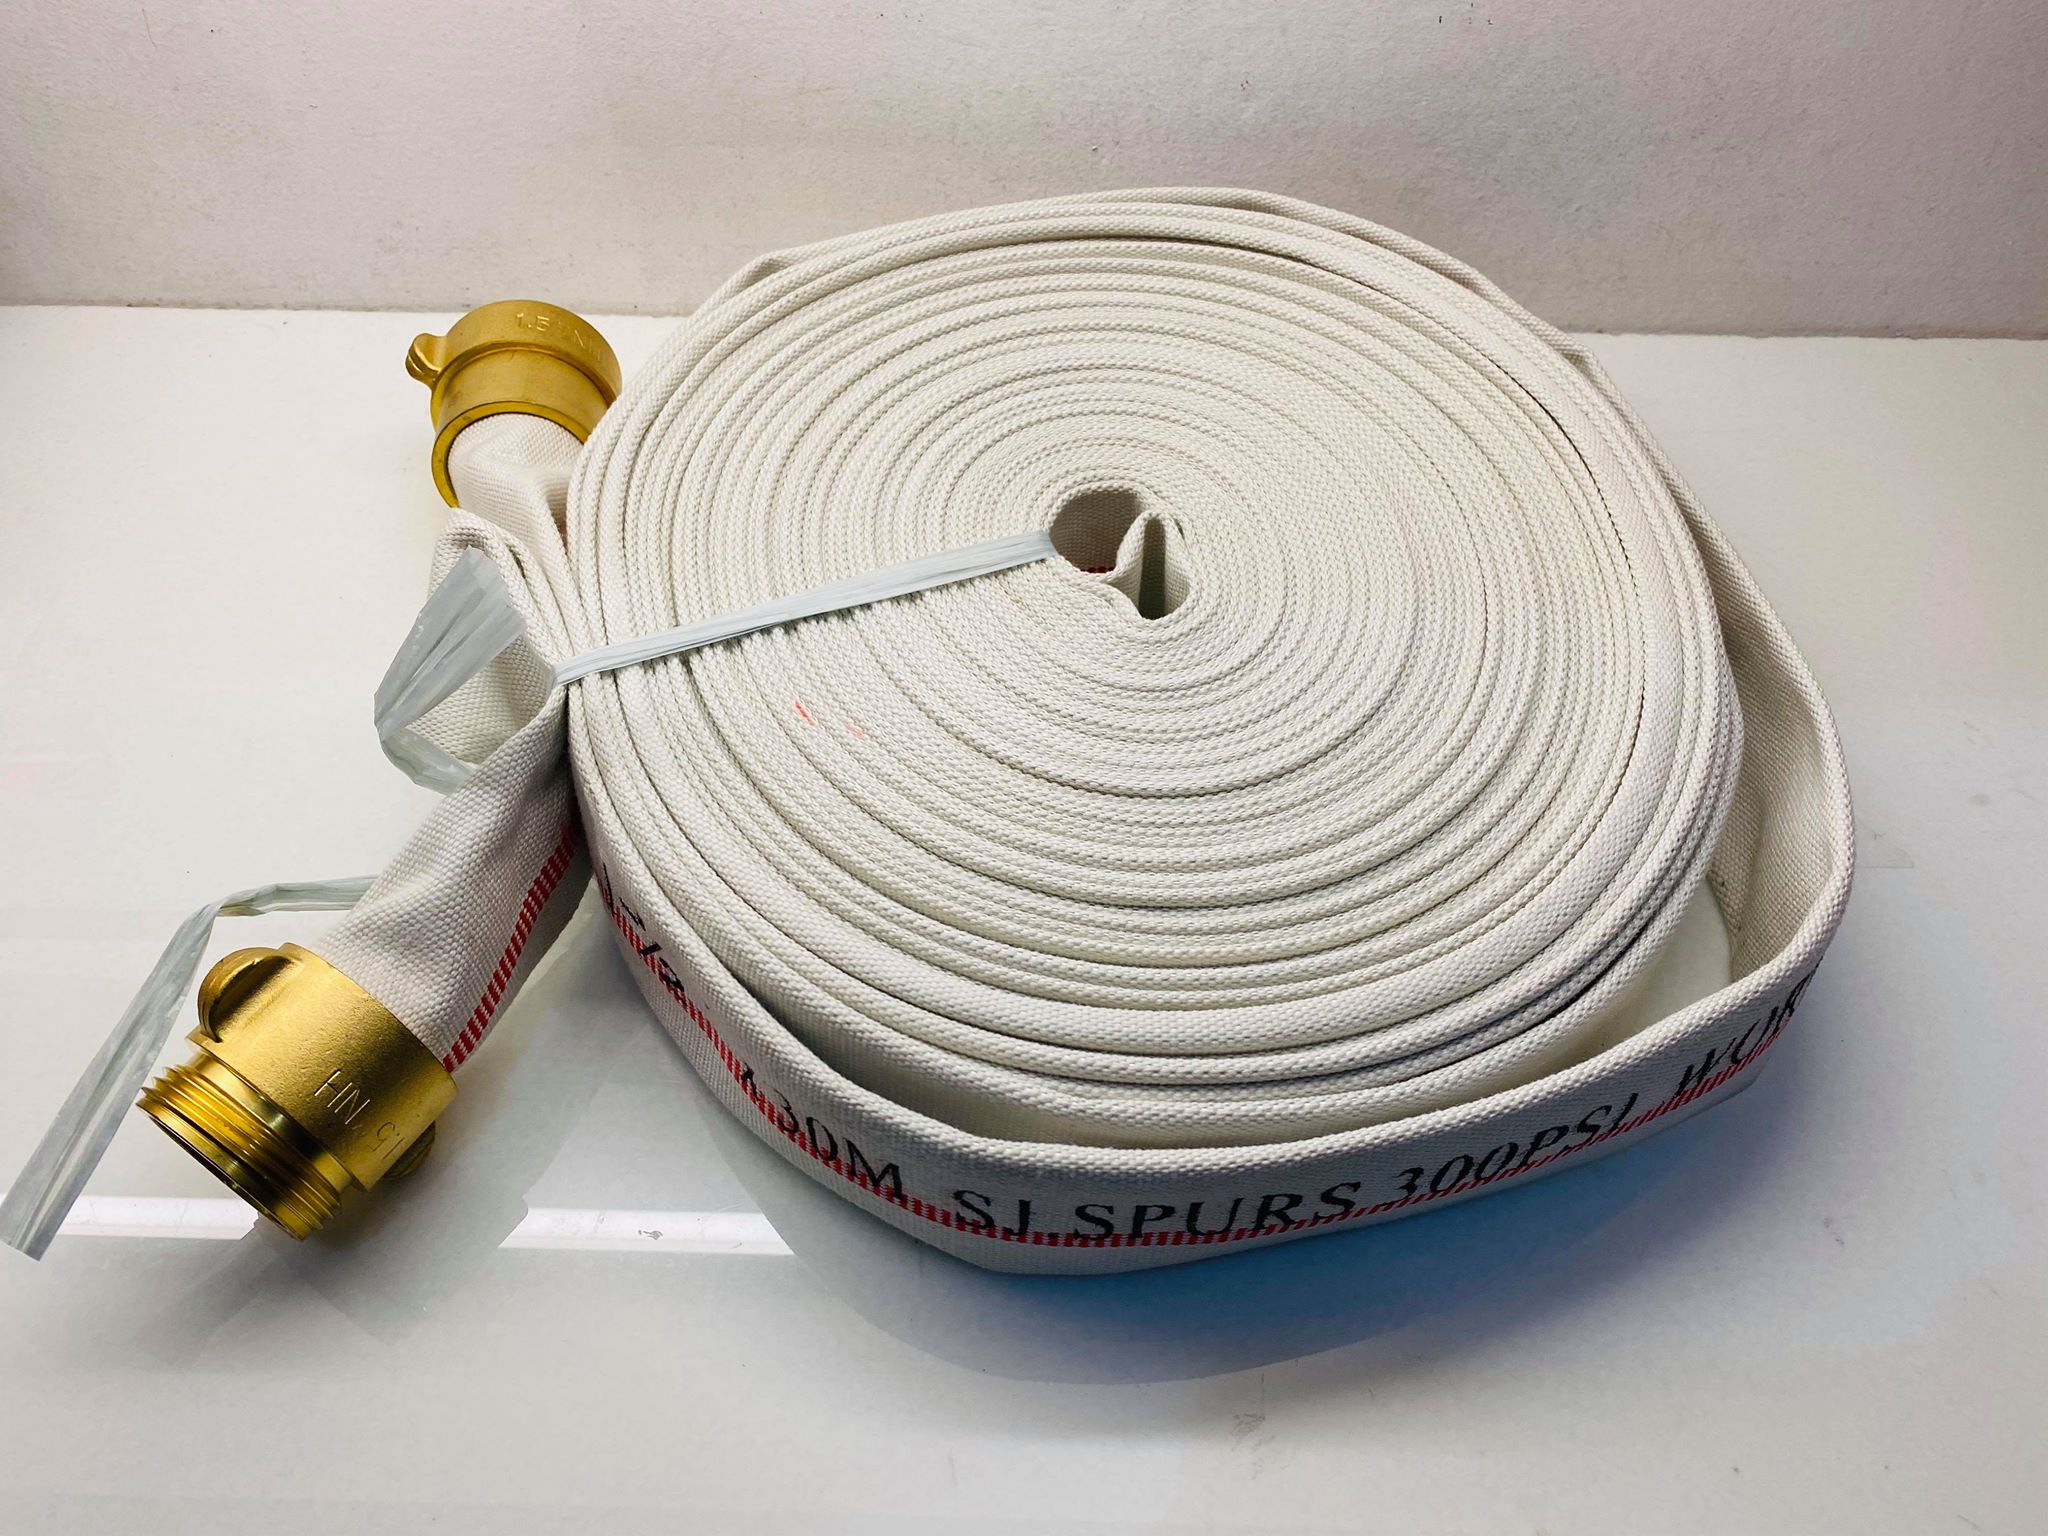 Fire Hose 1 1 2 X 100 Ft Single Jacket Brass Coupling 1 5 Inches X 100ft 40mm X 30 Meters Lazada Ph